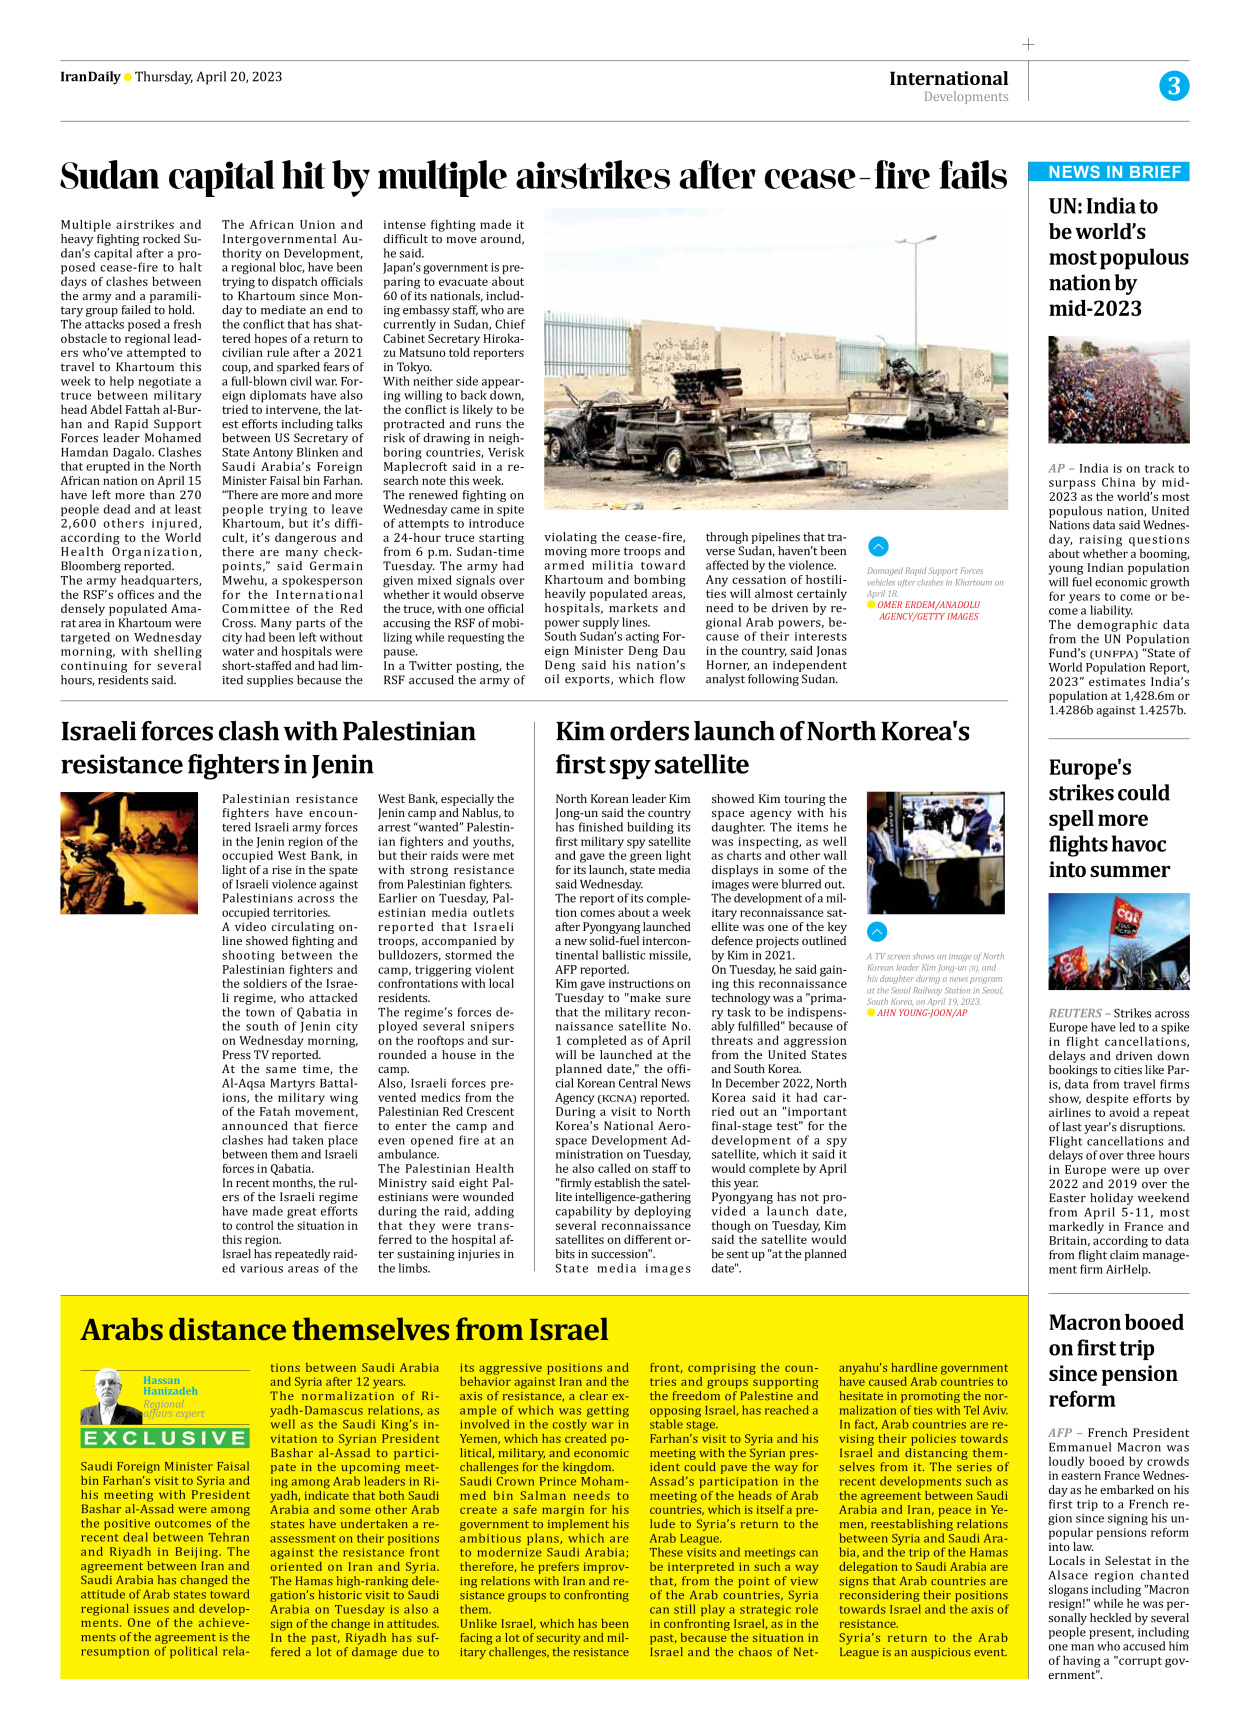 Iran Daily - Number Seven Thousand Two Hundred and Seventy Three - 20 April 2023 - Page 3